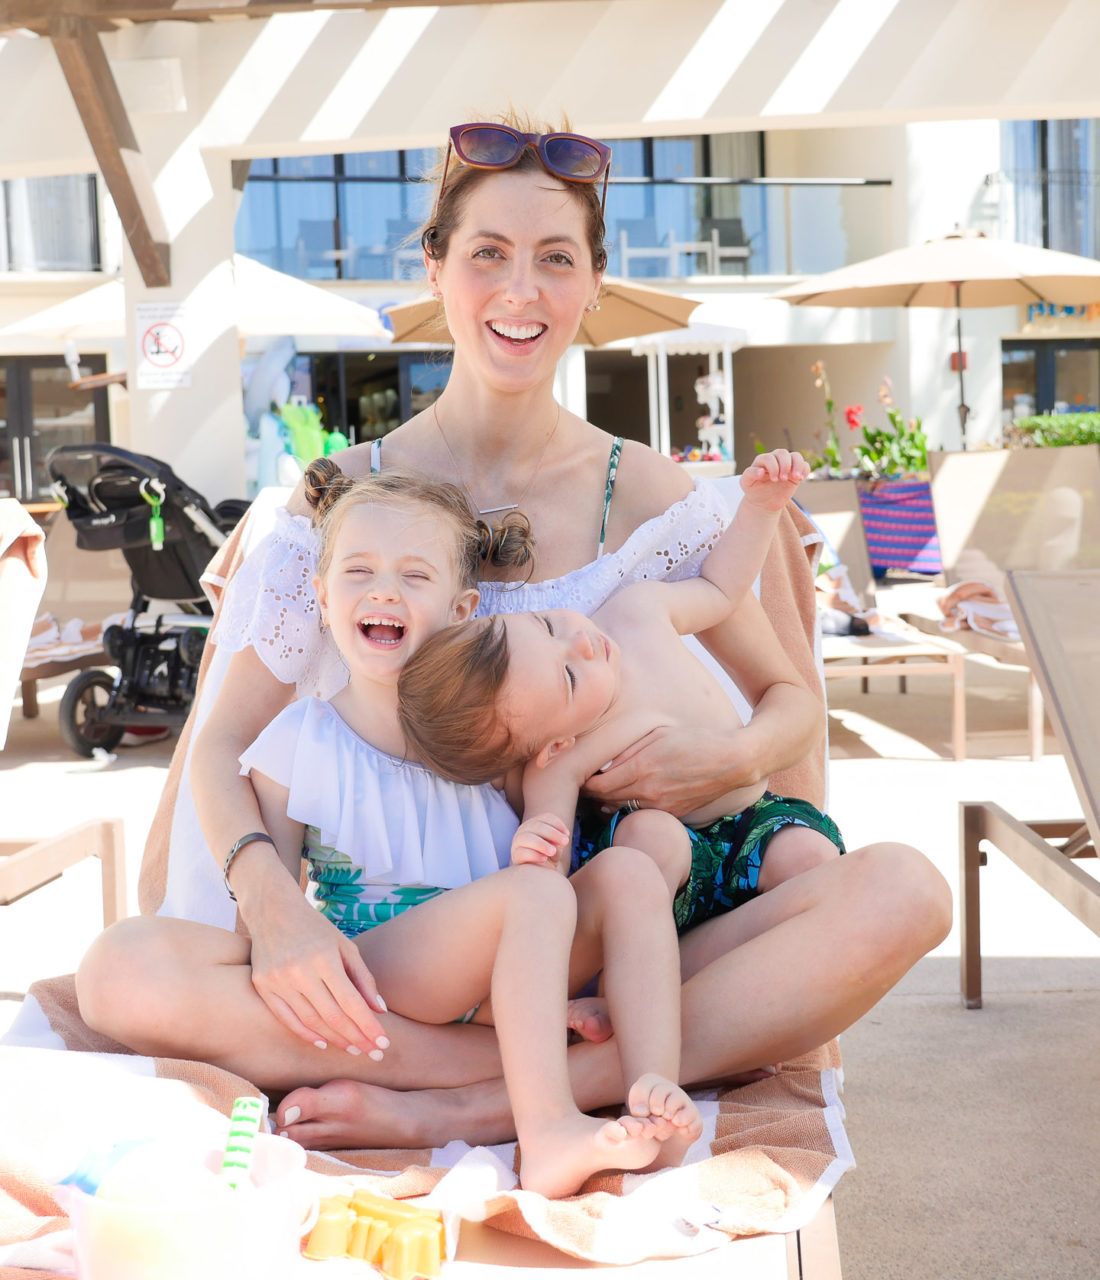 Eva Amurri Martino laughs with her son and daughter on vacation in Mexico